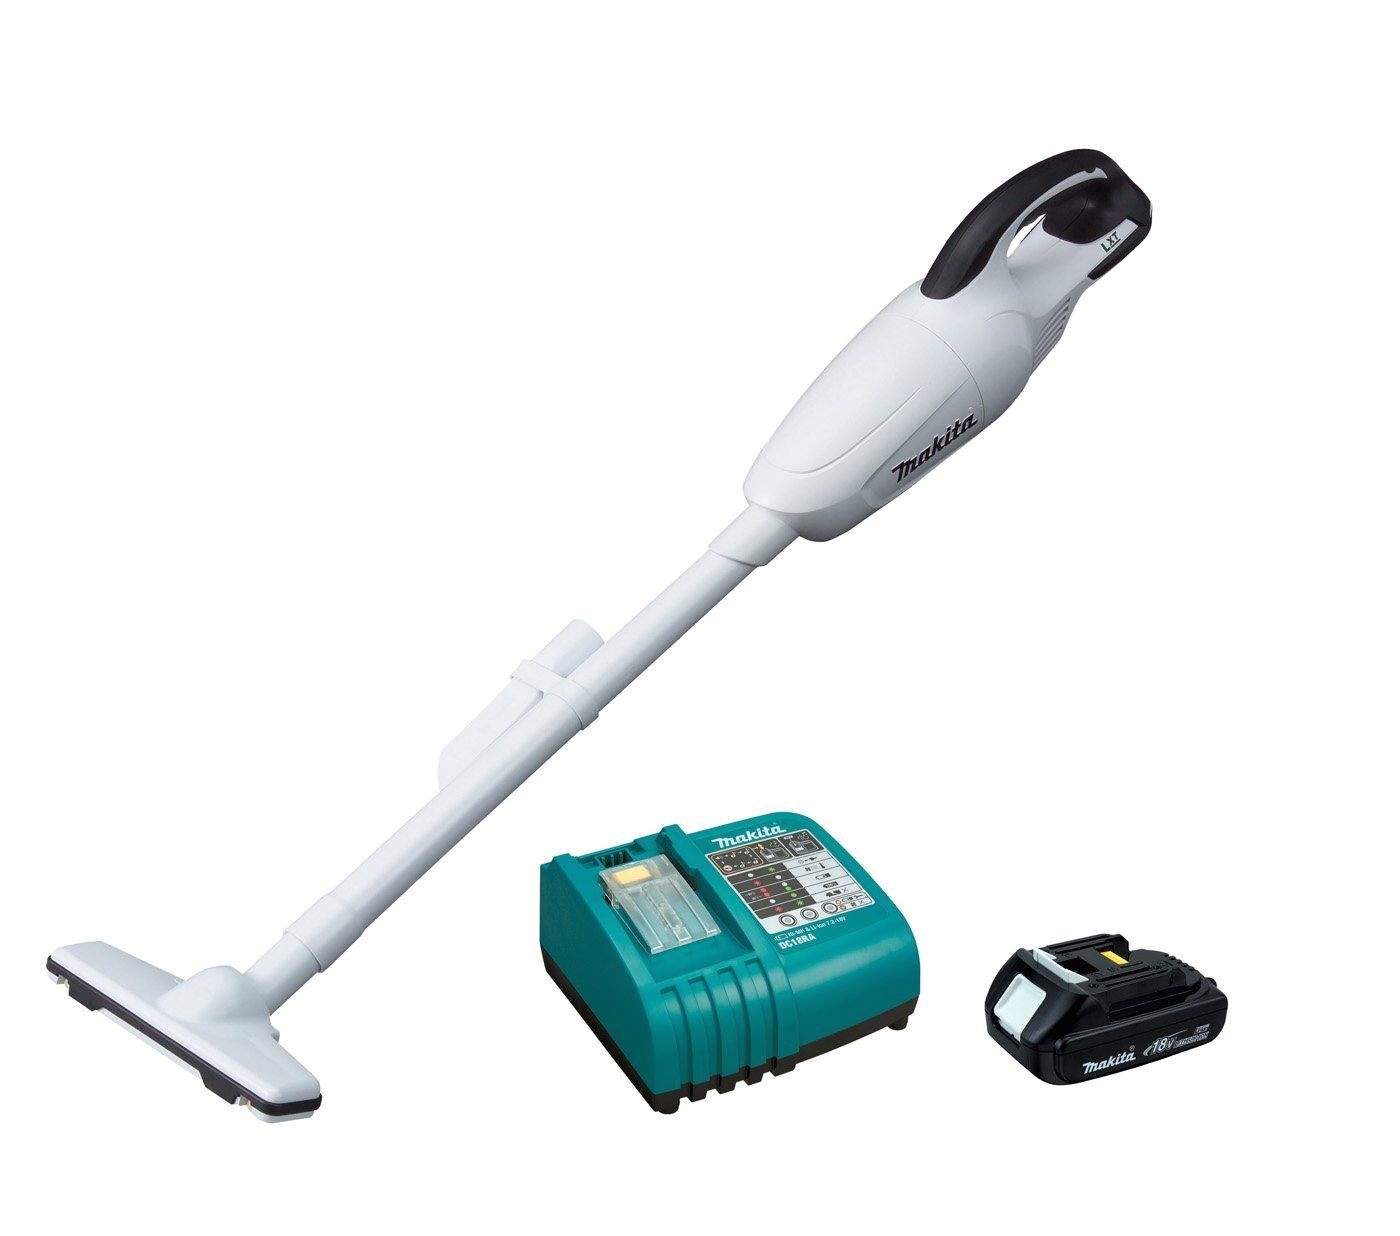 makita compact lithium ion takes care of mostly hard surface thin carpets and hard to reach places the compact lithium ion cordless vacuum s suction